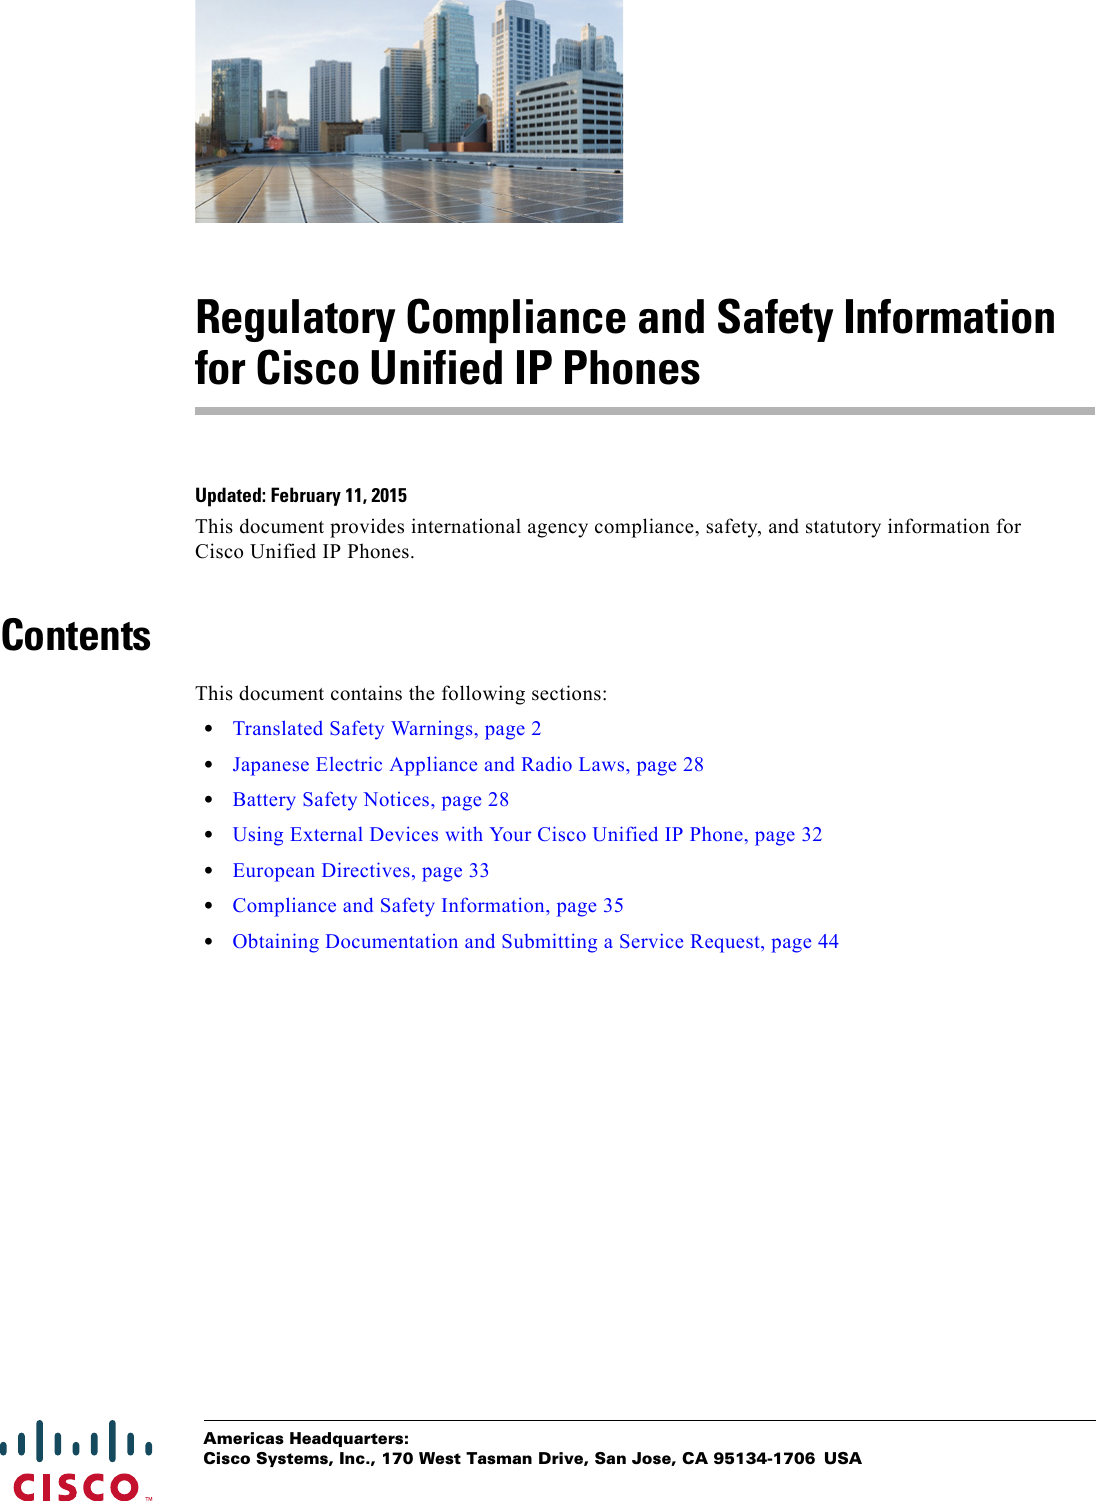  Americas Headquarters:Cisco Systems, Inc., 170 West Tasman Drive, San Jose, CA 95134-1706 USARegulatory Compliance and Safety Information for Cisco Unified IP PhonesUpdated: February 11, 2015This document provides international agency compliance, safety, and statutory information for Cisco Unified IP Phones.ContentsThis document contains the following sections:•Translated Safety Warnings, page 2•Japanese Electric Appliance and Radio Laws, page 28•Battery Safety Notices, page 28•Using External Devices with Your Cisco Unified IP Phone, page 32•European Directives, page 33•Compliance and Safety Information, page 35•Obtaining Documentation and Submitting a Service Request, page 44